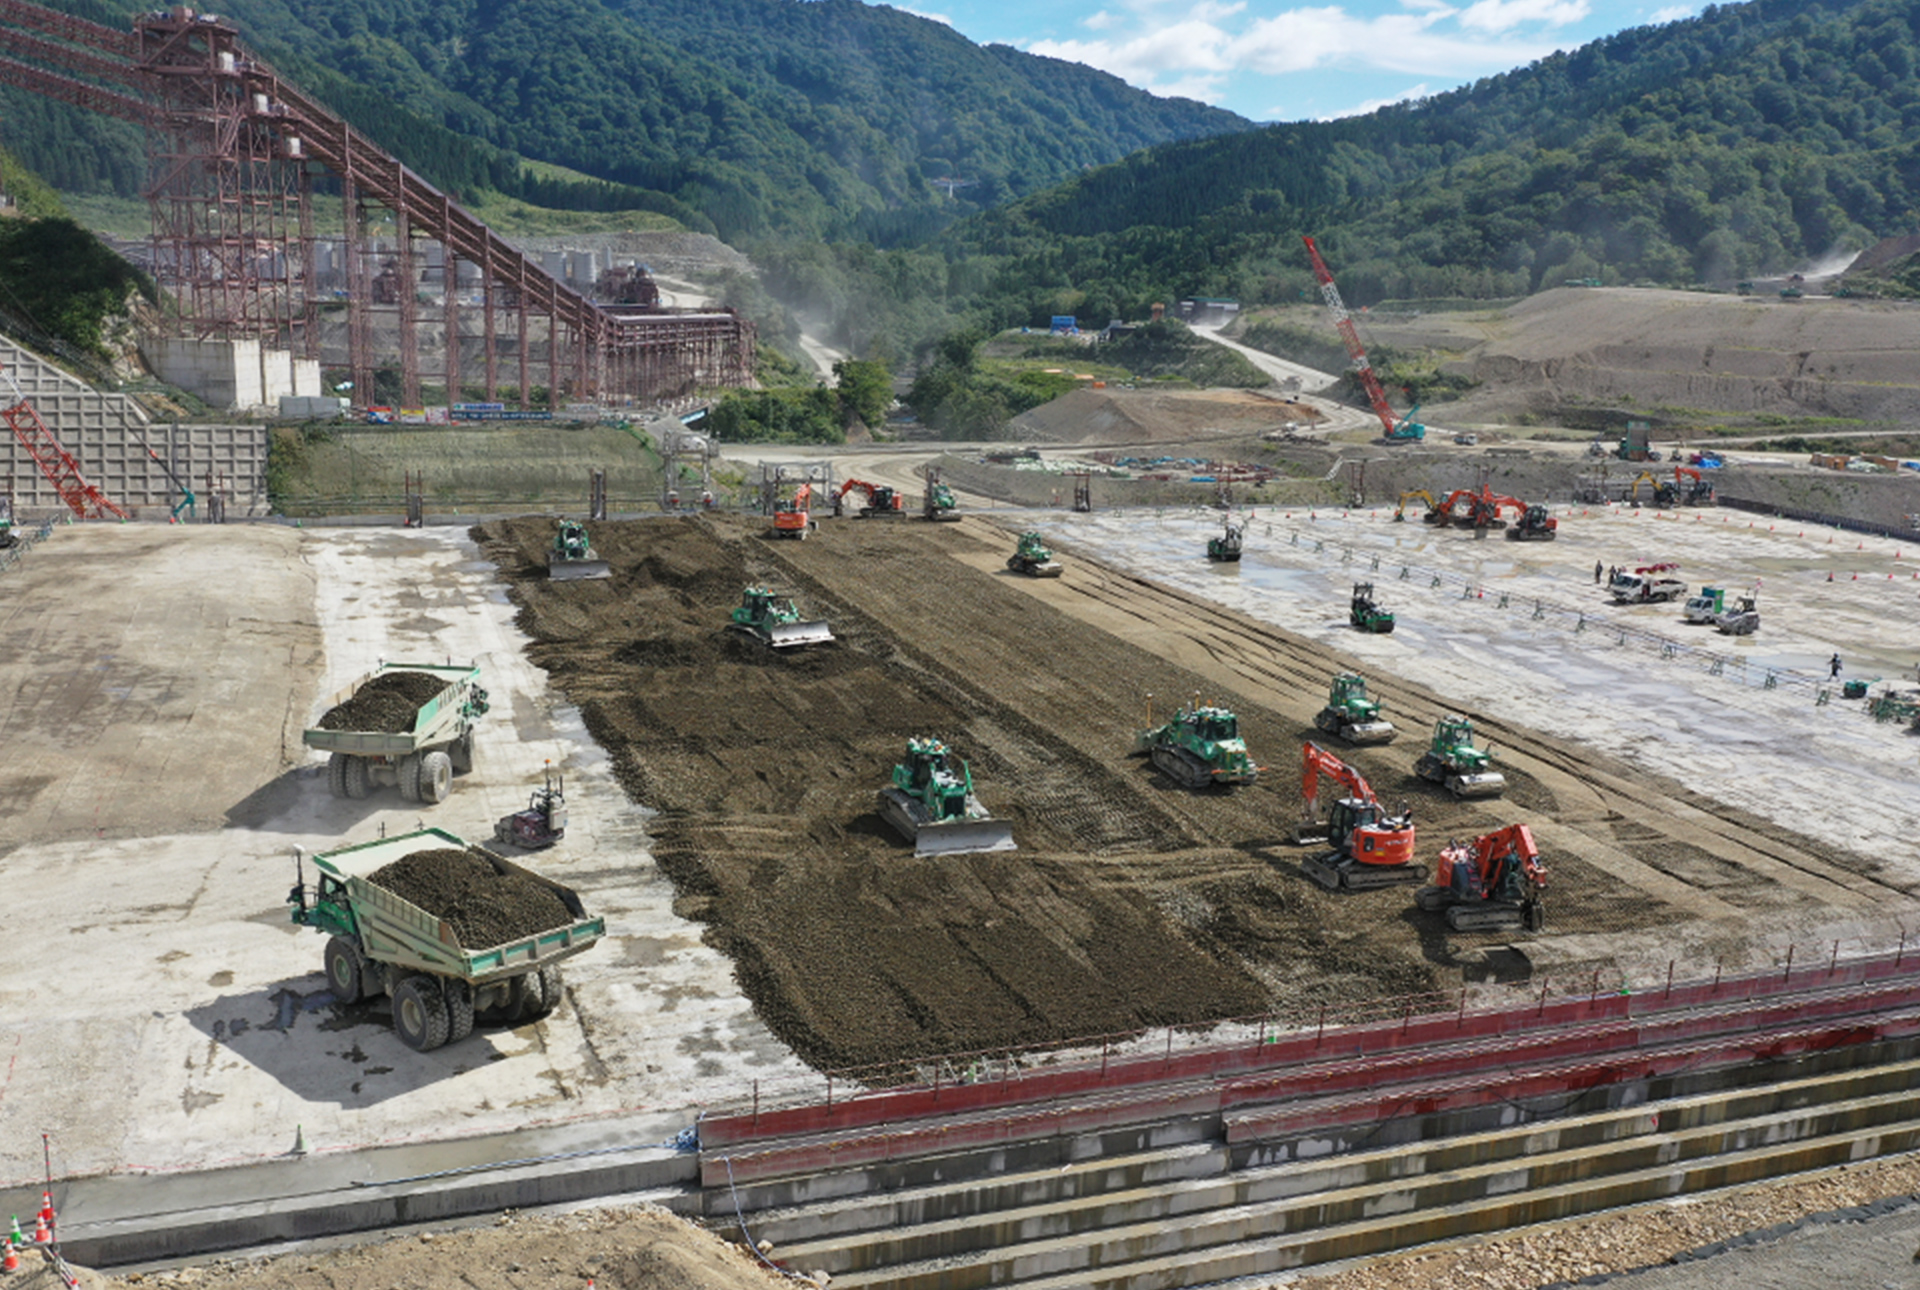 Casting work on the embankment of Naruse Dam with multiple automated construction machines working in coordination